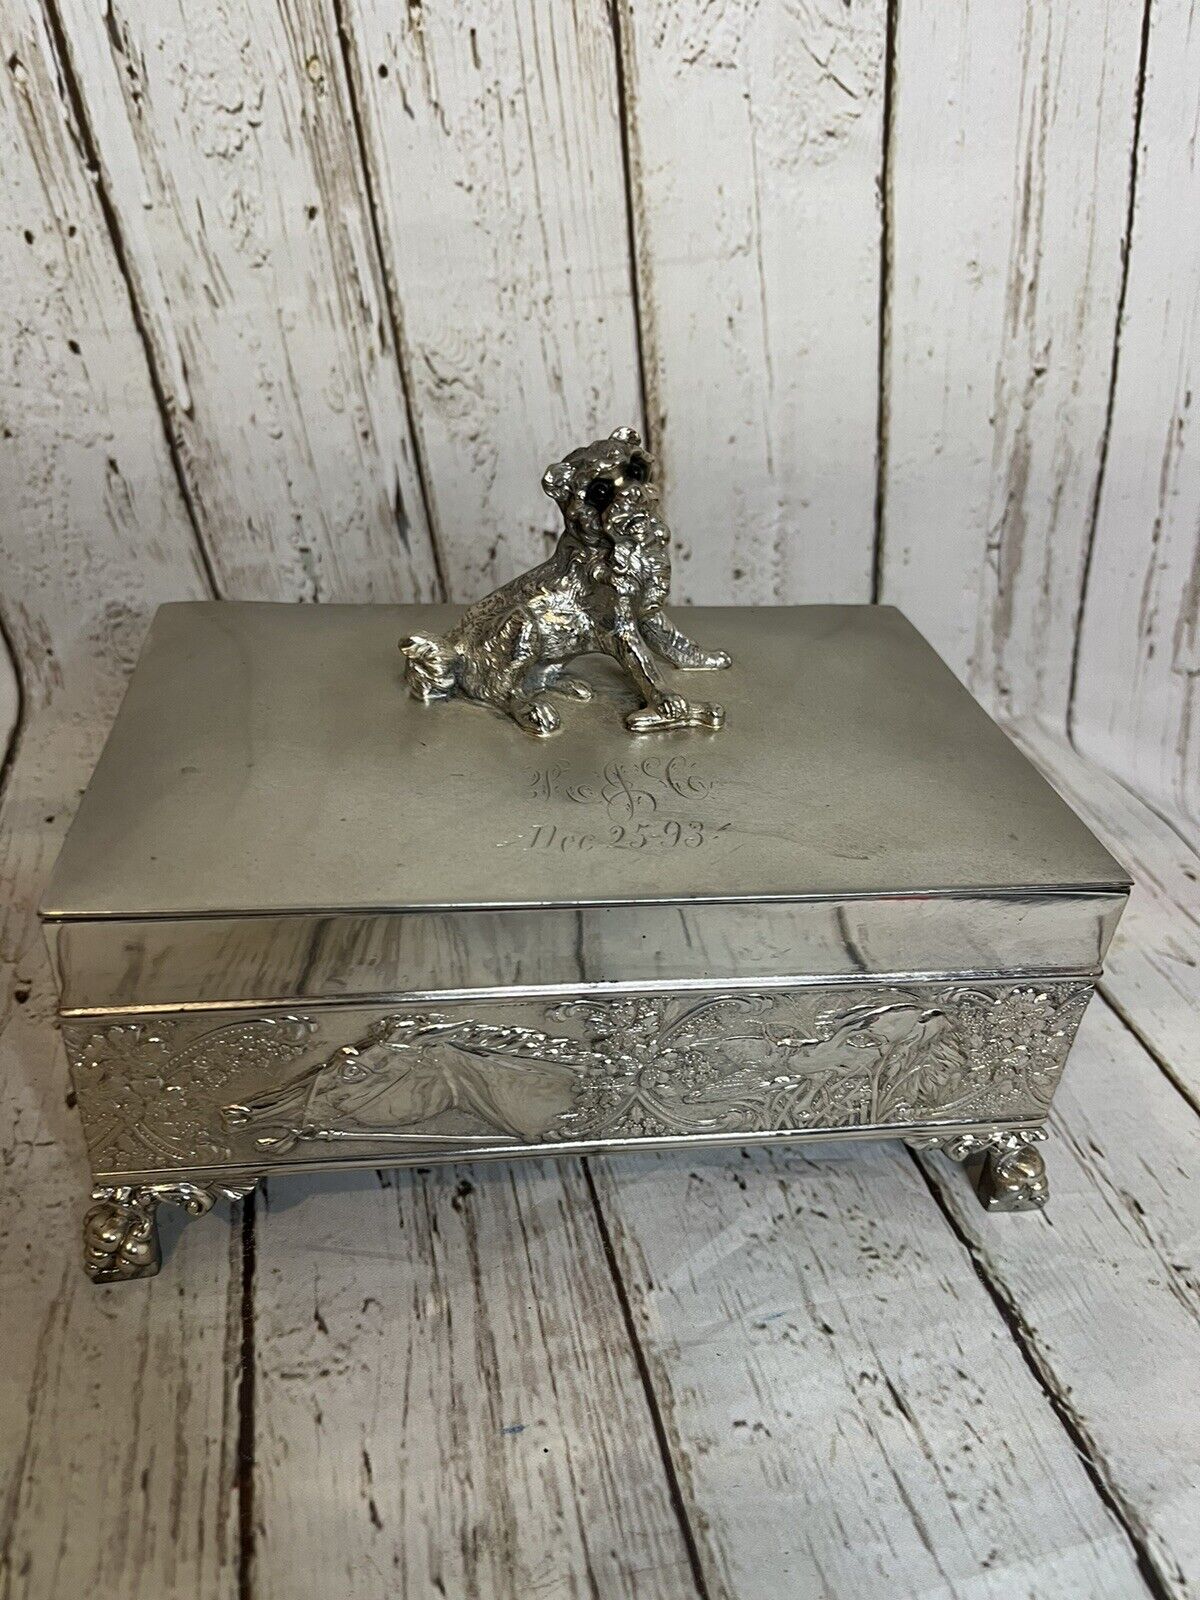 Antique Tufts Silver Plated Humidor with Dog Figure